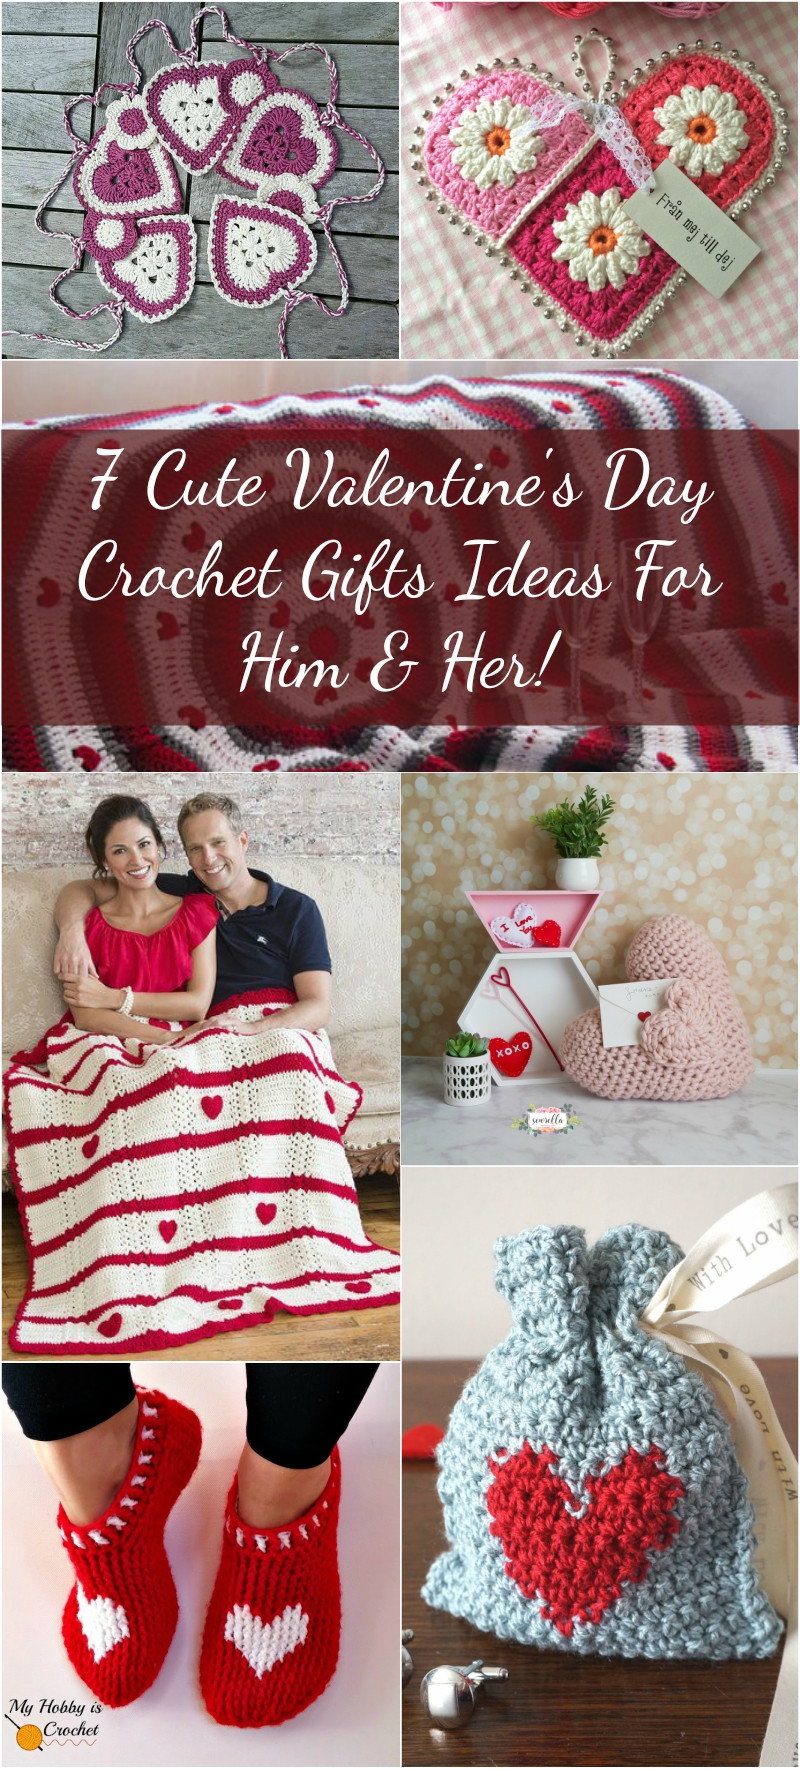 Cute Valentine Gift Ideas For Her
 7 Cute Valentine s Day Crochet Gifts Ideas For Him & Her